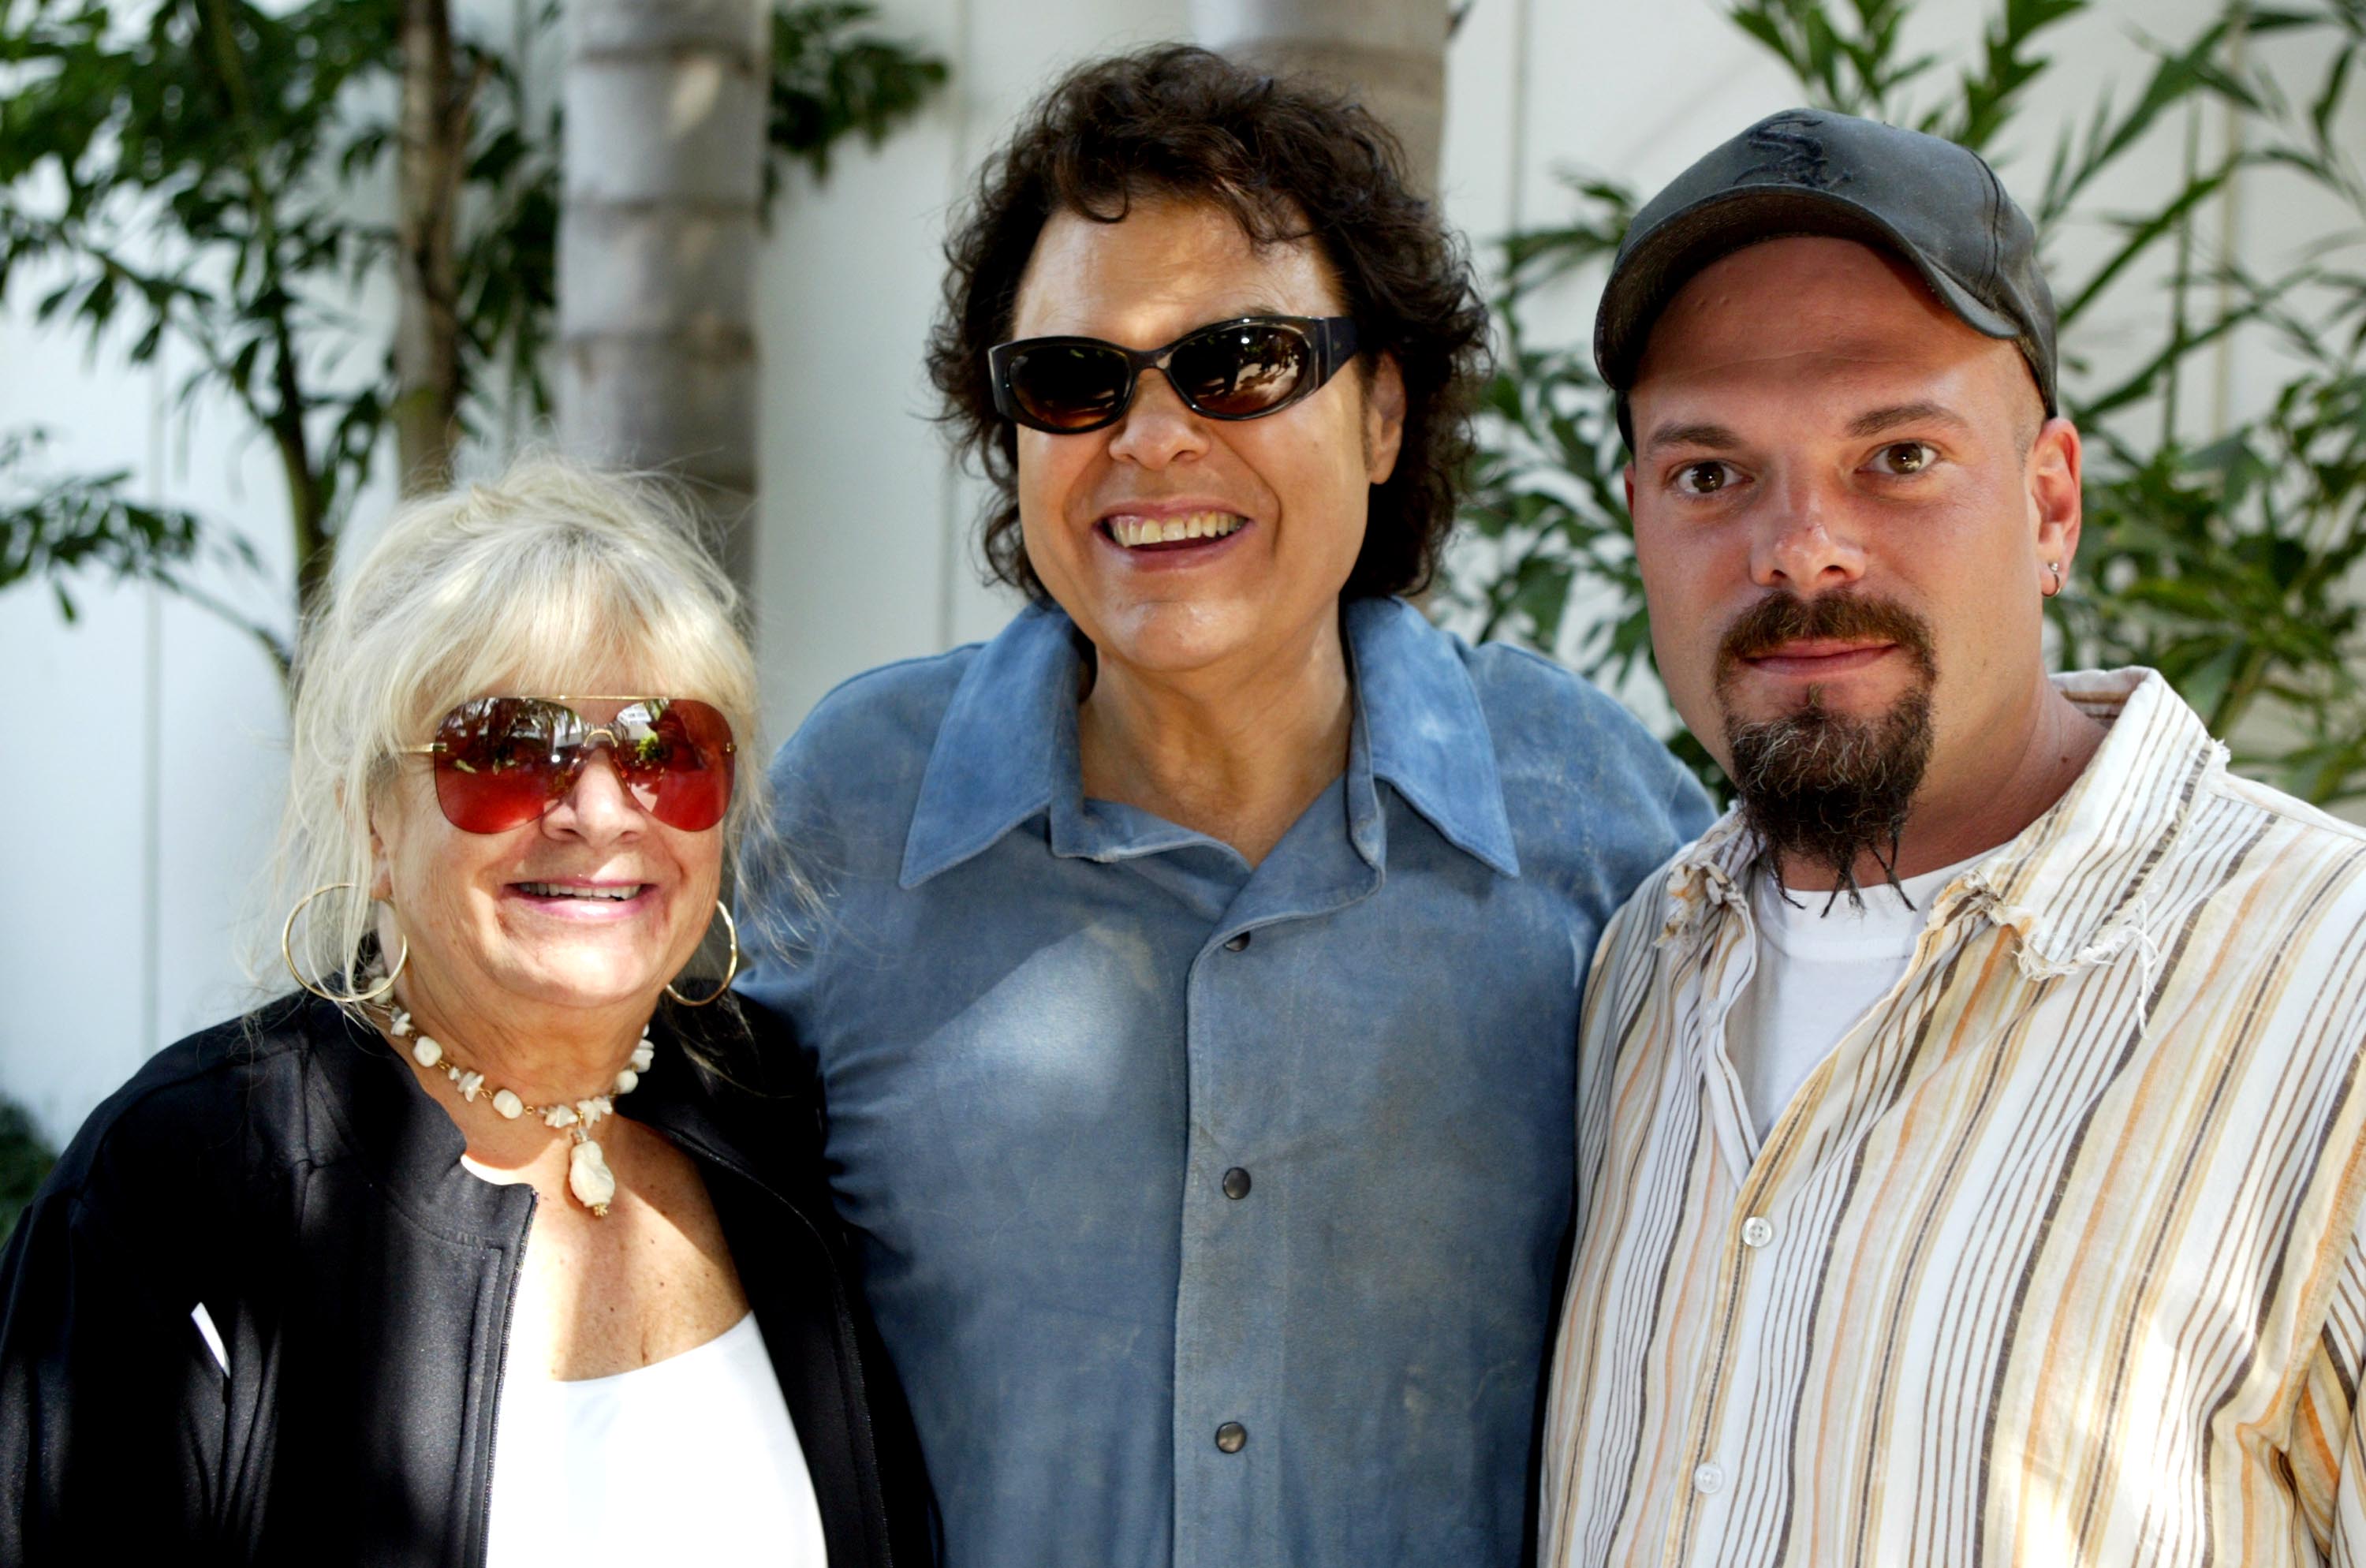 Ronnie Milsap, Joyce Reeves, and their son Todd at the rehearsals for the Ray Charles tribute on September 29, 2004, in Beverly Hills | Source: Getty Images